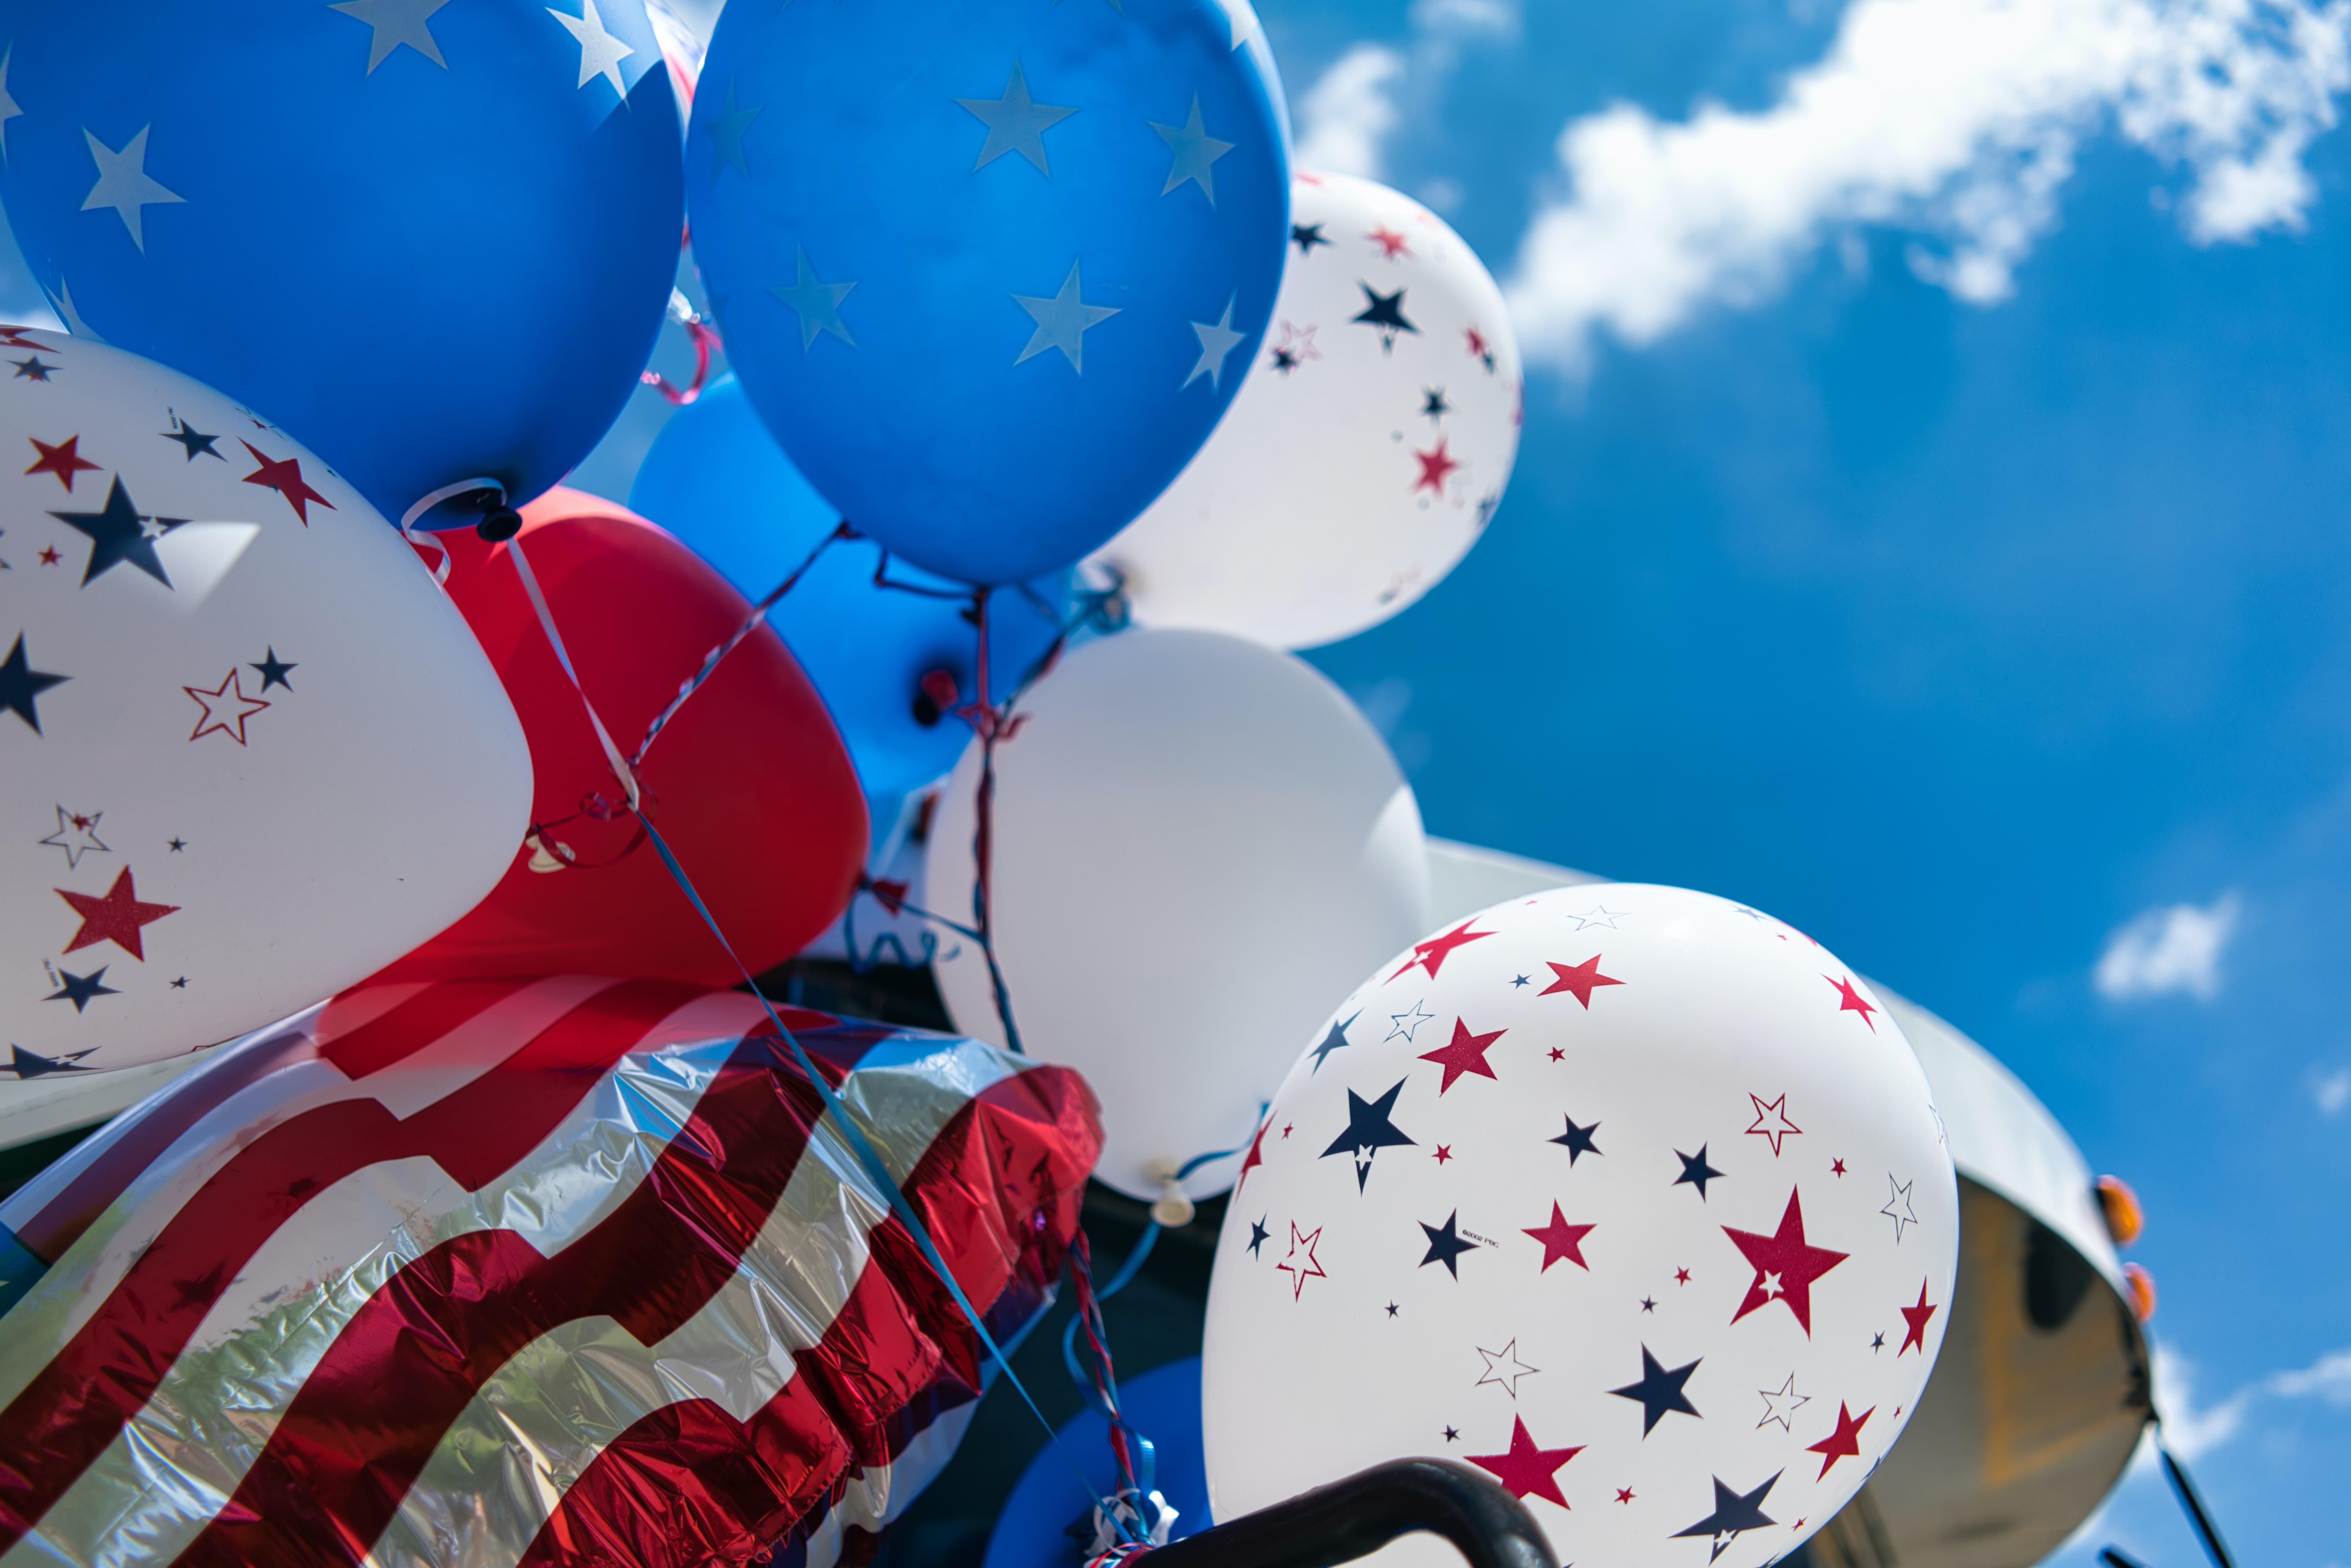 Red white and blue balloons with stars and stripes against a blue sky